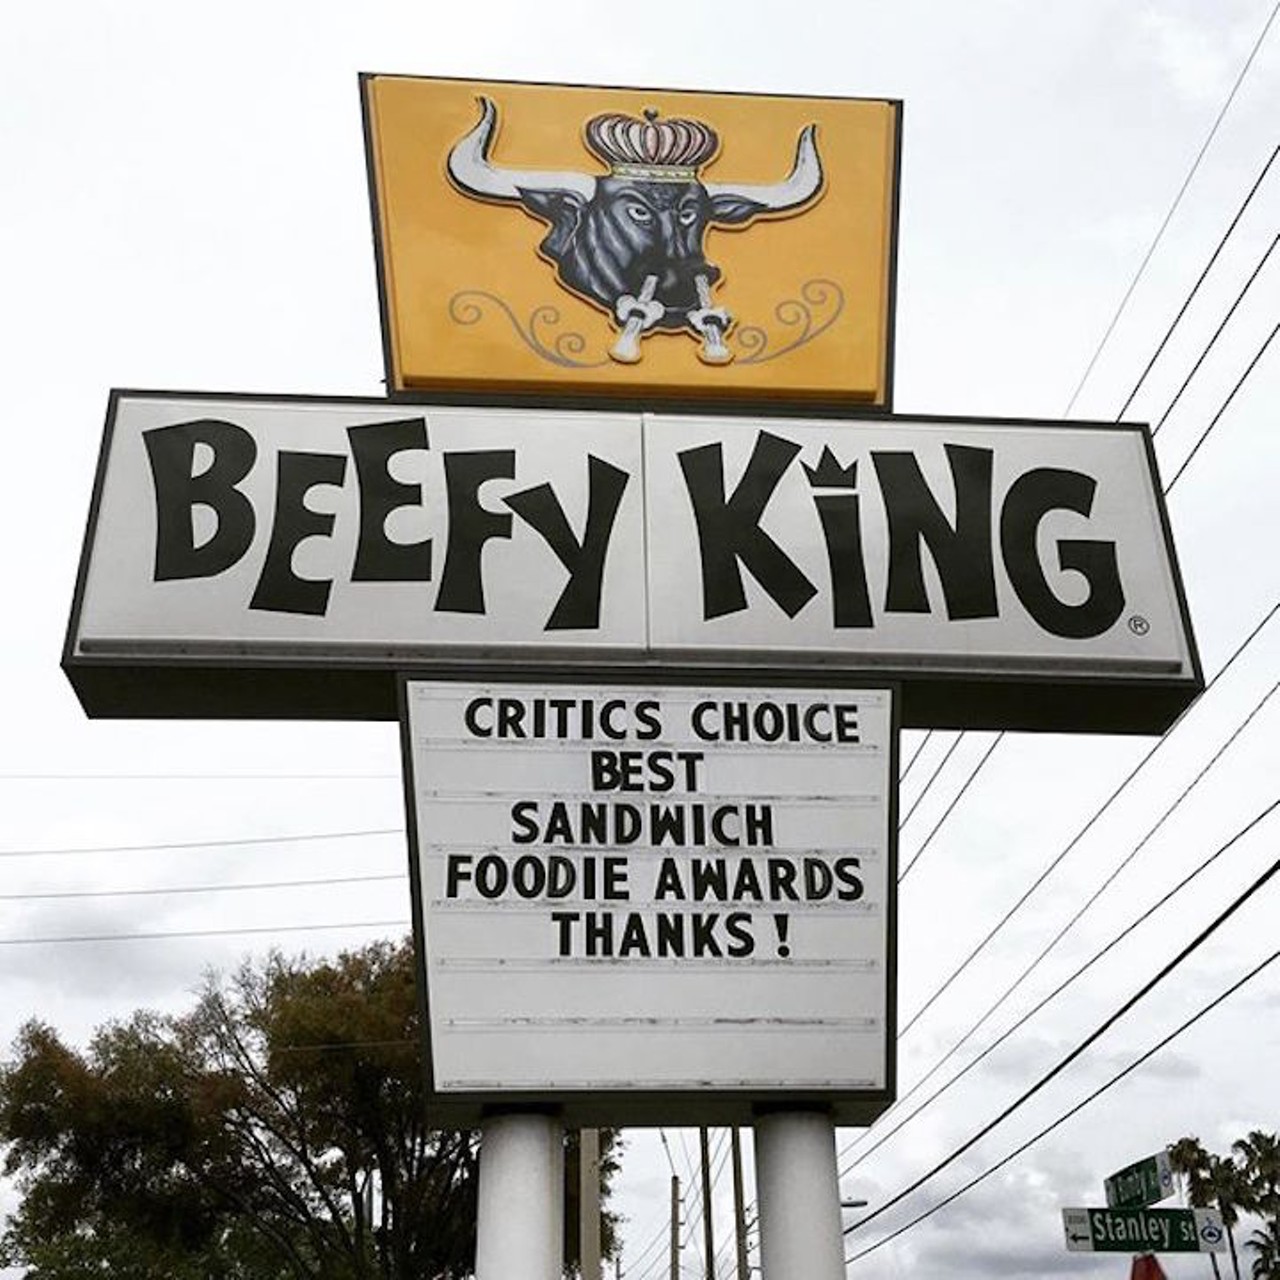 Beefy King
424 N. Bumby Ave.; 407-894-2241
Beefy King certainly doesn&#146;t waste time with silly frills, what, with having only four options and all. Doesn&#146;t mean that their milkshakes won&#146;t be bringing you to their yard.
Photo via ericdesalvo/Instagram